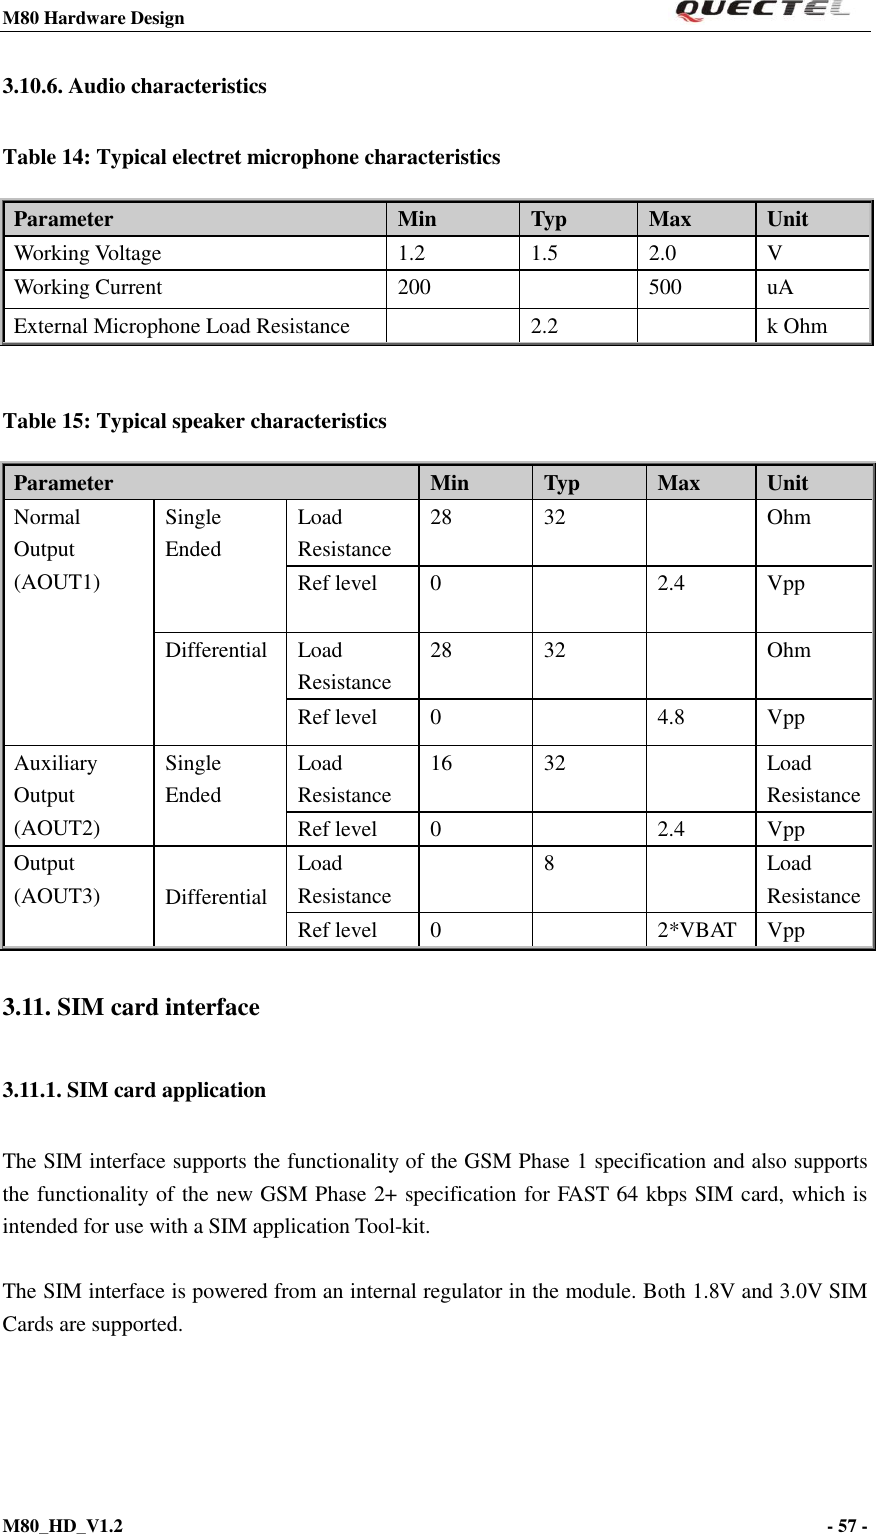 M80 Hardware Design                                                                M80_HD_V1.2                                                                                                                                        - 57 -    3.10.6. Audio characteristics Table 14: Typical electret microphone characteristics Parameter Min Typ Max Unit Working Voltage 1.2 1.5 2.0 V Working Current 200  500 uA External Microphone Load Resistance  2.2  k Ohm  Table 15: Typical speaker characteristics Parameter Min Typ Max Unit Normal Output (AOUT1) Single Ended   Load Resistance 28 32  Ohm Ref level 0  2.4 Vpp  Differential Load Resistance 28 32  Ohm Ref level 0  4.8 Vpp Auxiliary Output (AOUT2) Single Ended   Load Resistance 16  32  Load Resistance Ref level 0  2.4 Vpp Output (AOUT3) Differential Load Resistance   8  Load Resistance Ref level 0  2*VBAT Vpp 3.11. SIM card interface 3.11.1. SIM card application The SIM interface supports the functionality of the GSM Phase 1 specification and also supports the functionality of the new GSM Phase 2+ specification for FAST 64 kbps SIM card, which is intended for use with a SIM application Tool-kit.  The SIM interface is powered from an internal regulator in the module. Both 1.8V and 3.0V SIM Cards are supported.   